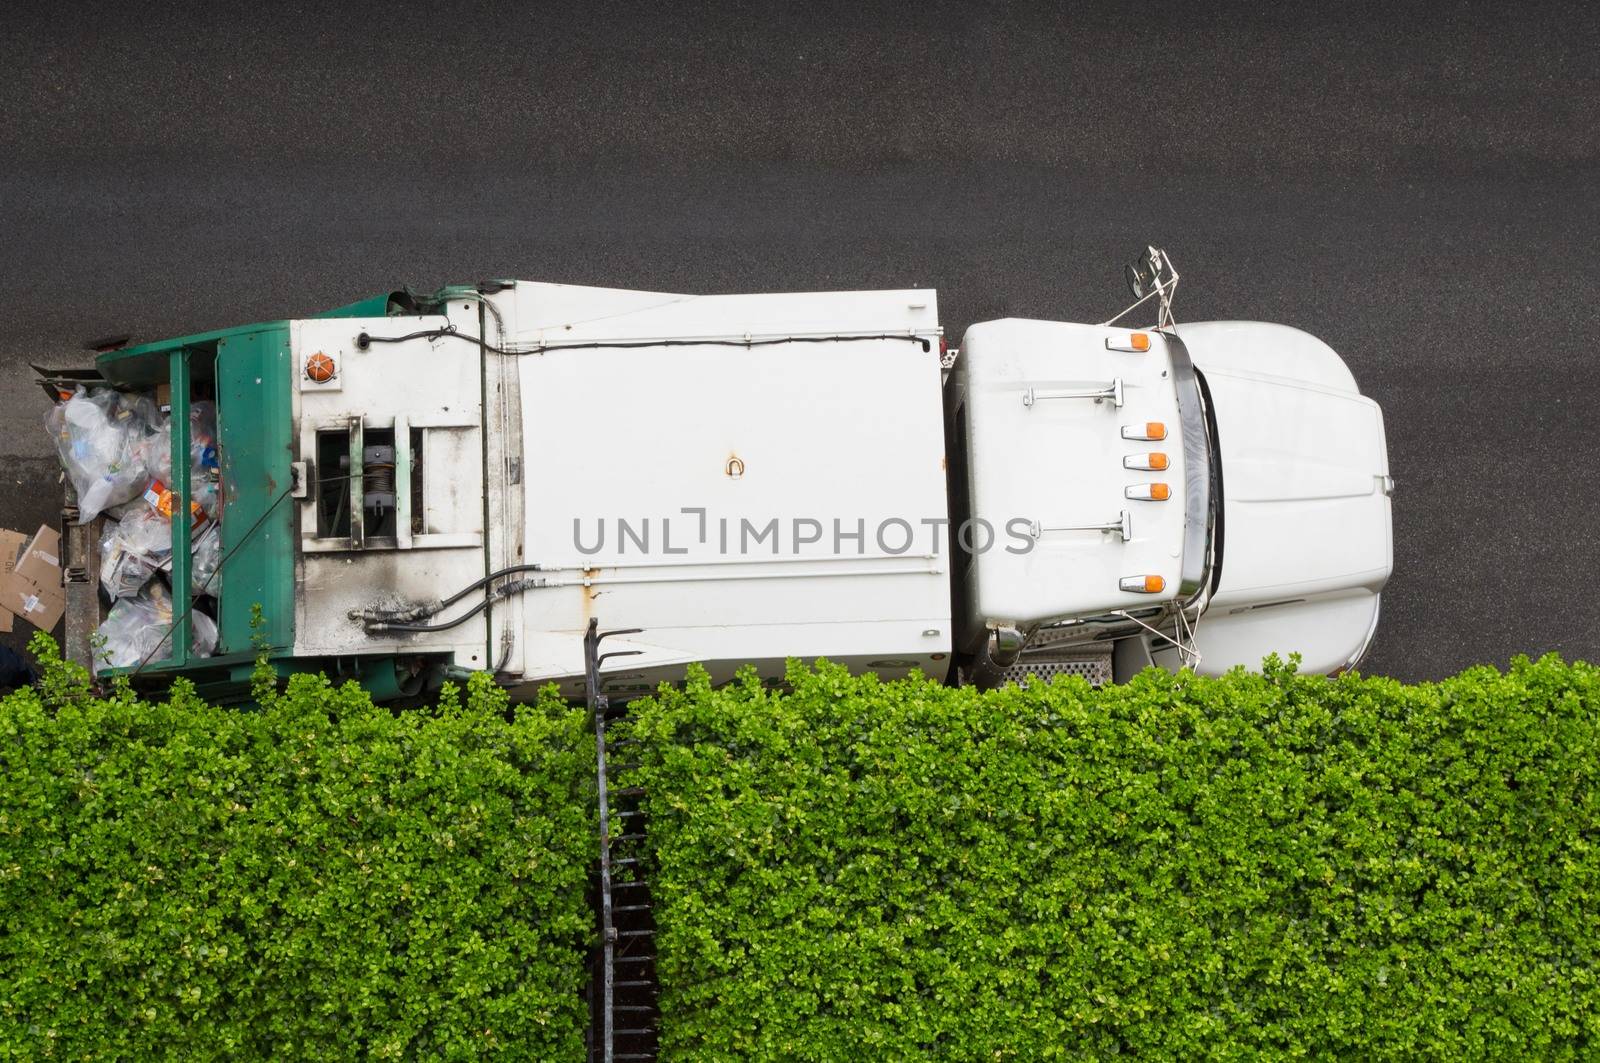 Aerial view of garbage truck parked next to green hedge